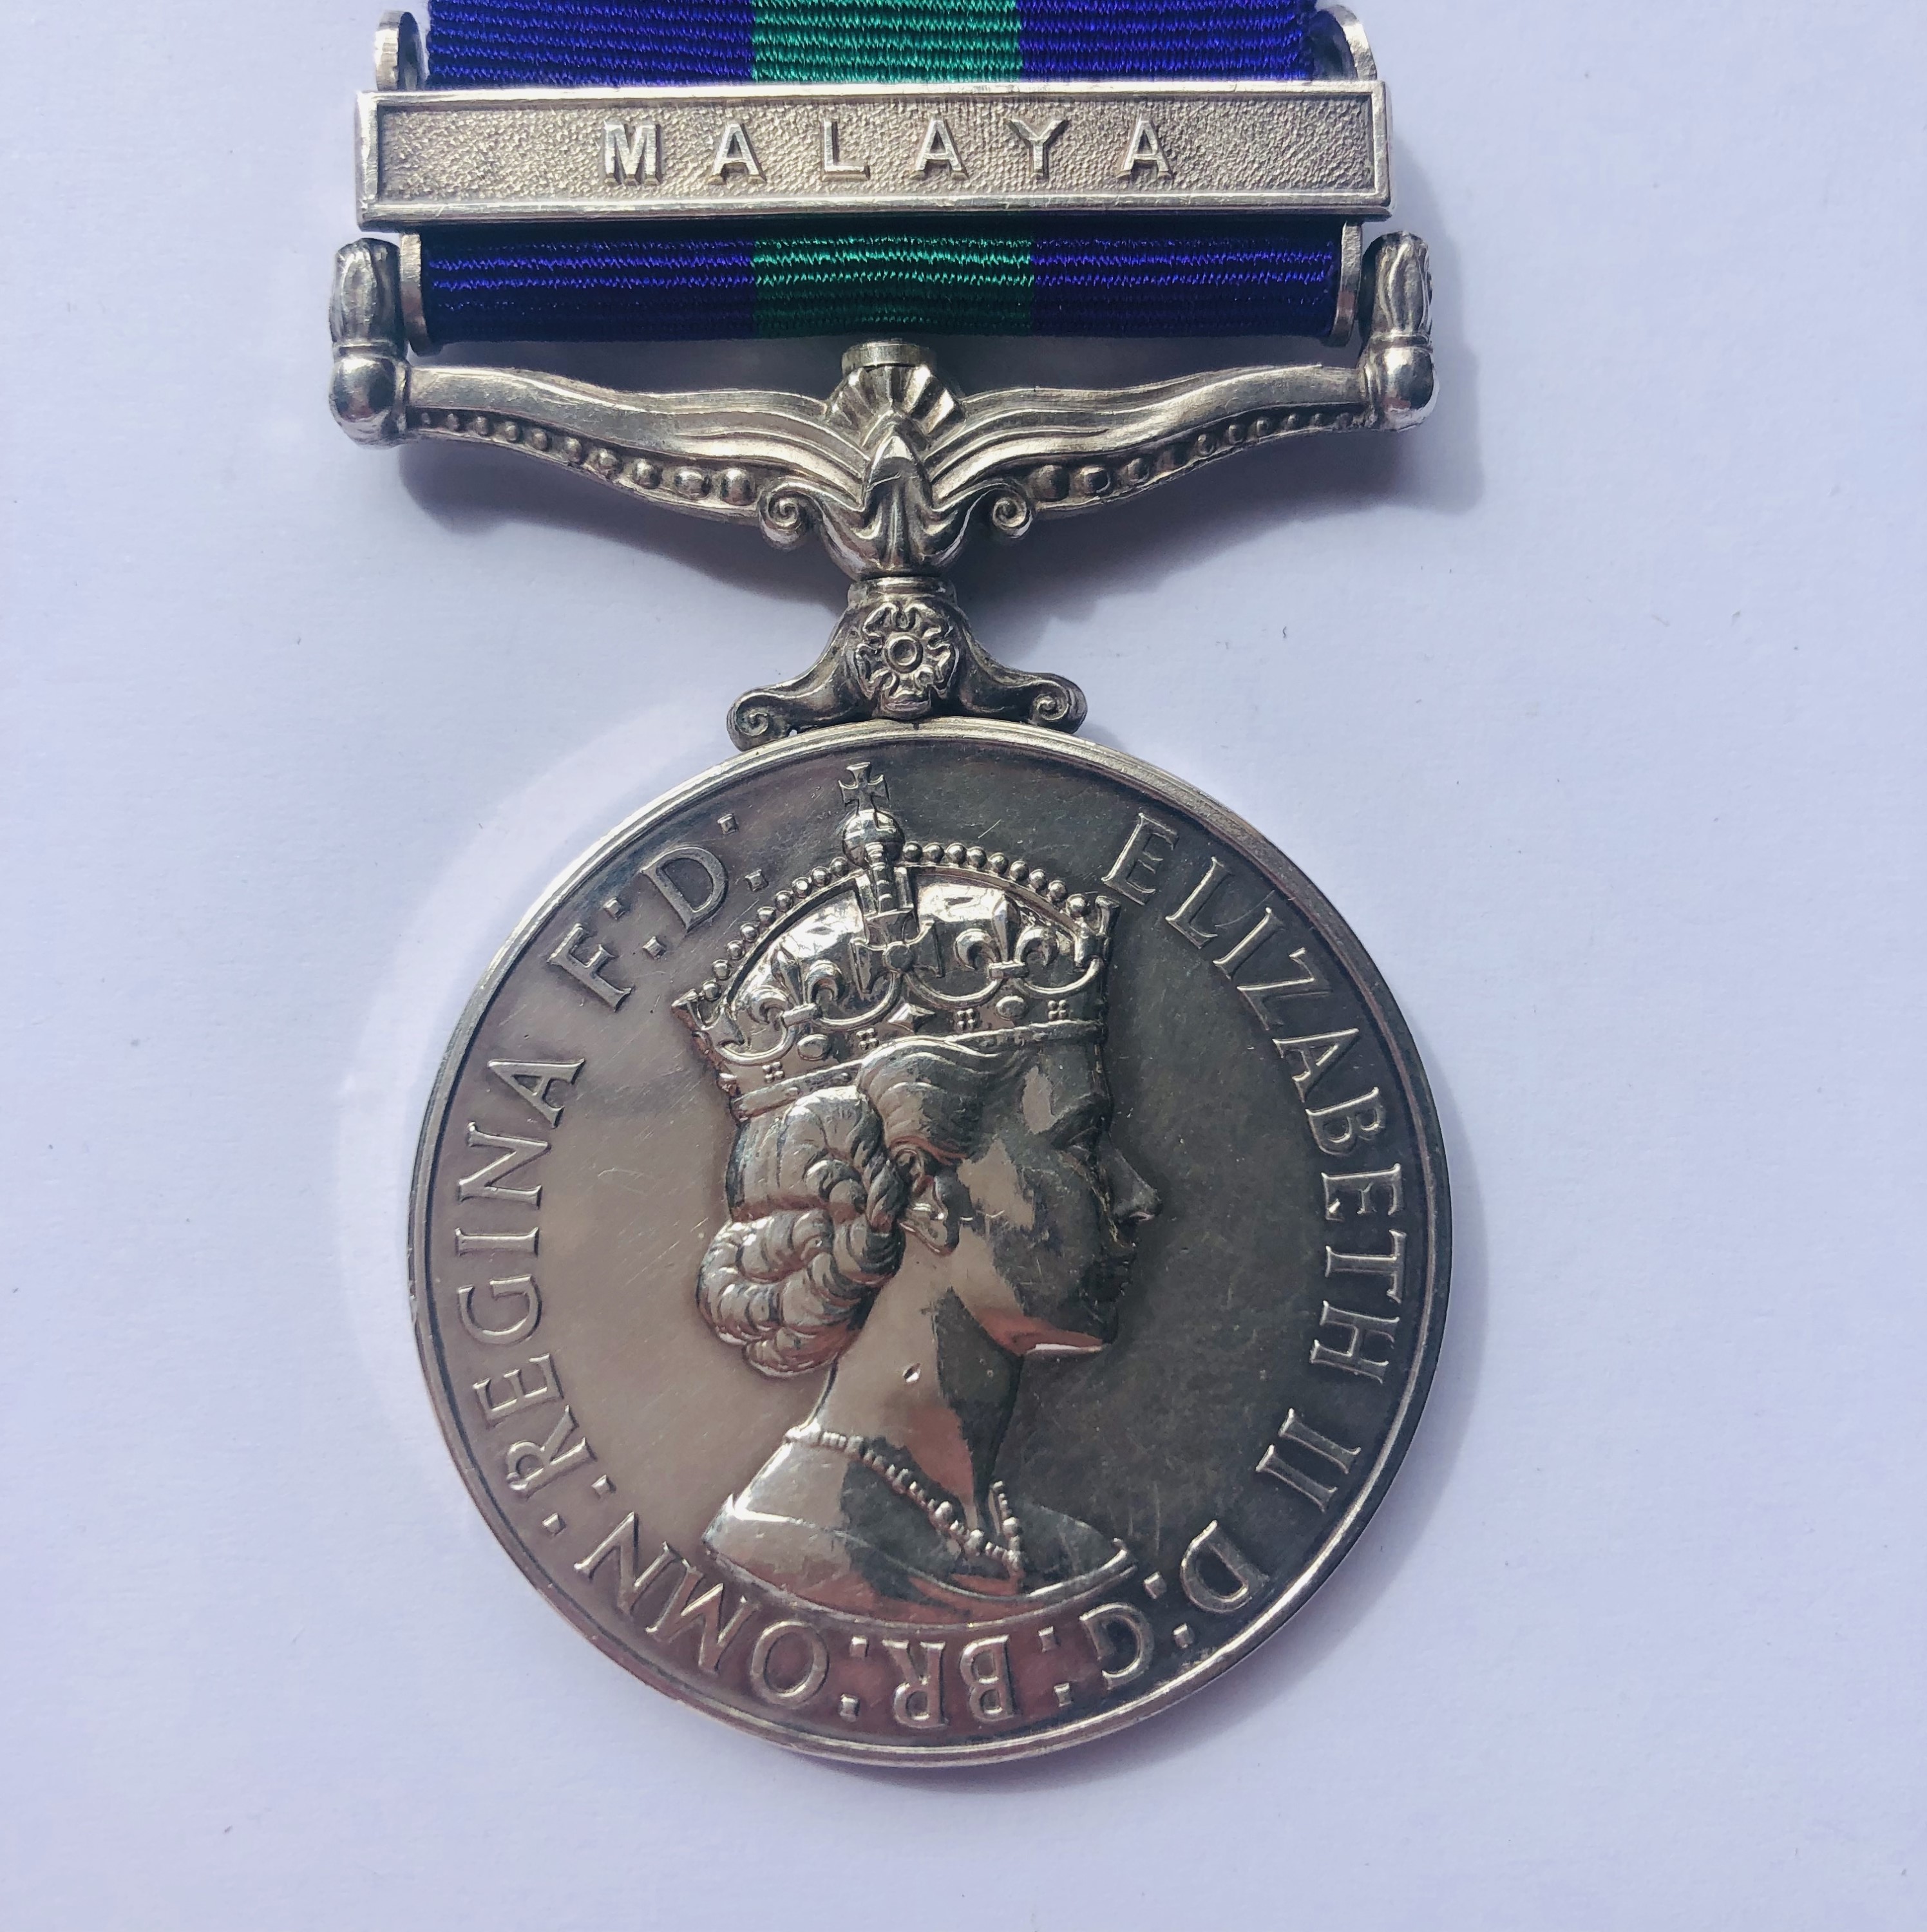 A QEII General Service Medal with Malaya clasp to 22305944 Cpl J Dillon, 11th Hussars